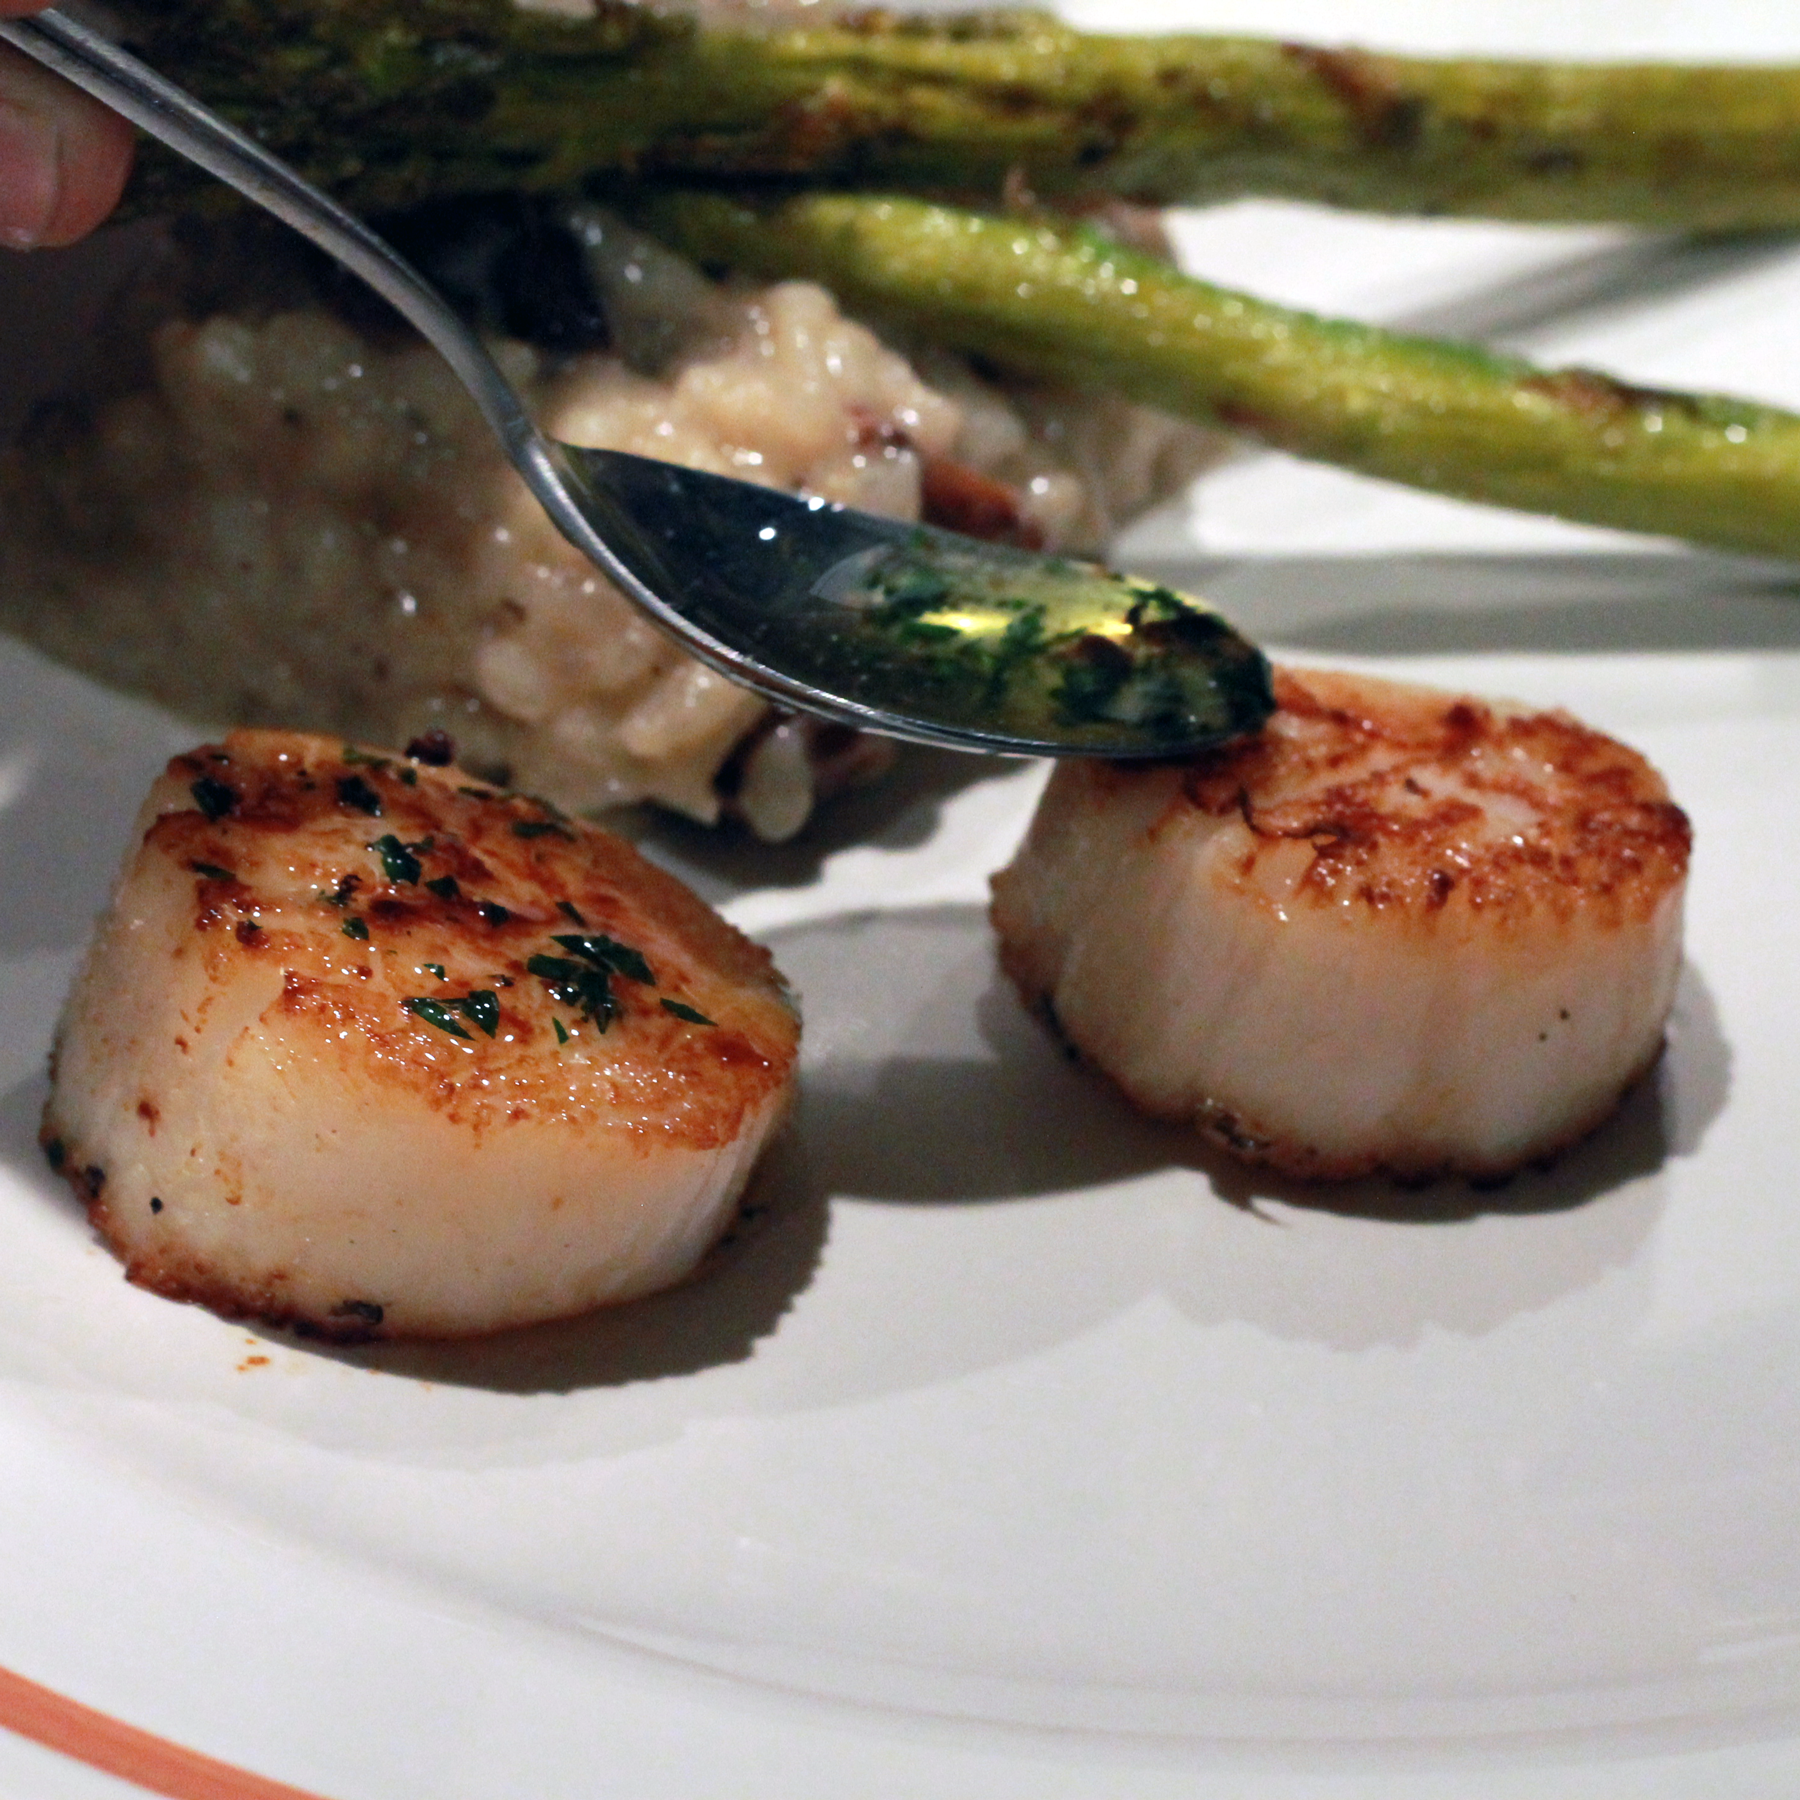 Scallop grilled perfectly on indoor grill cinder grill